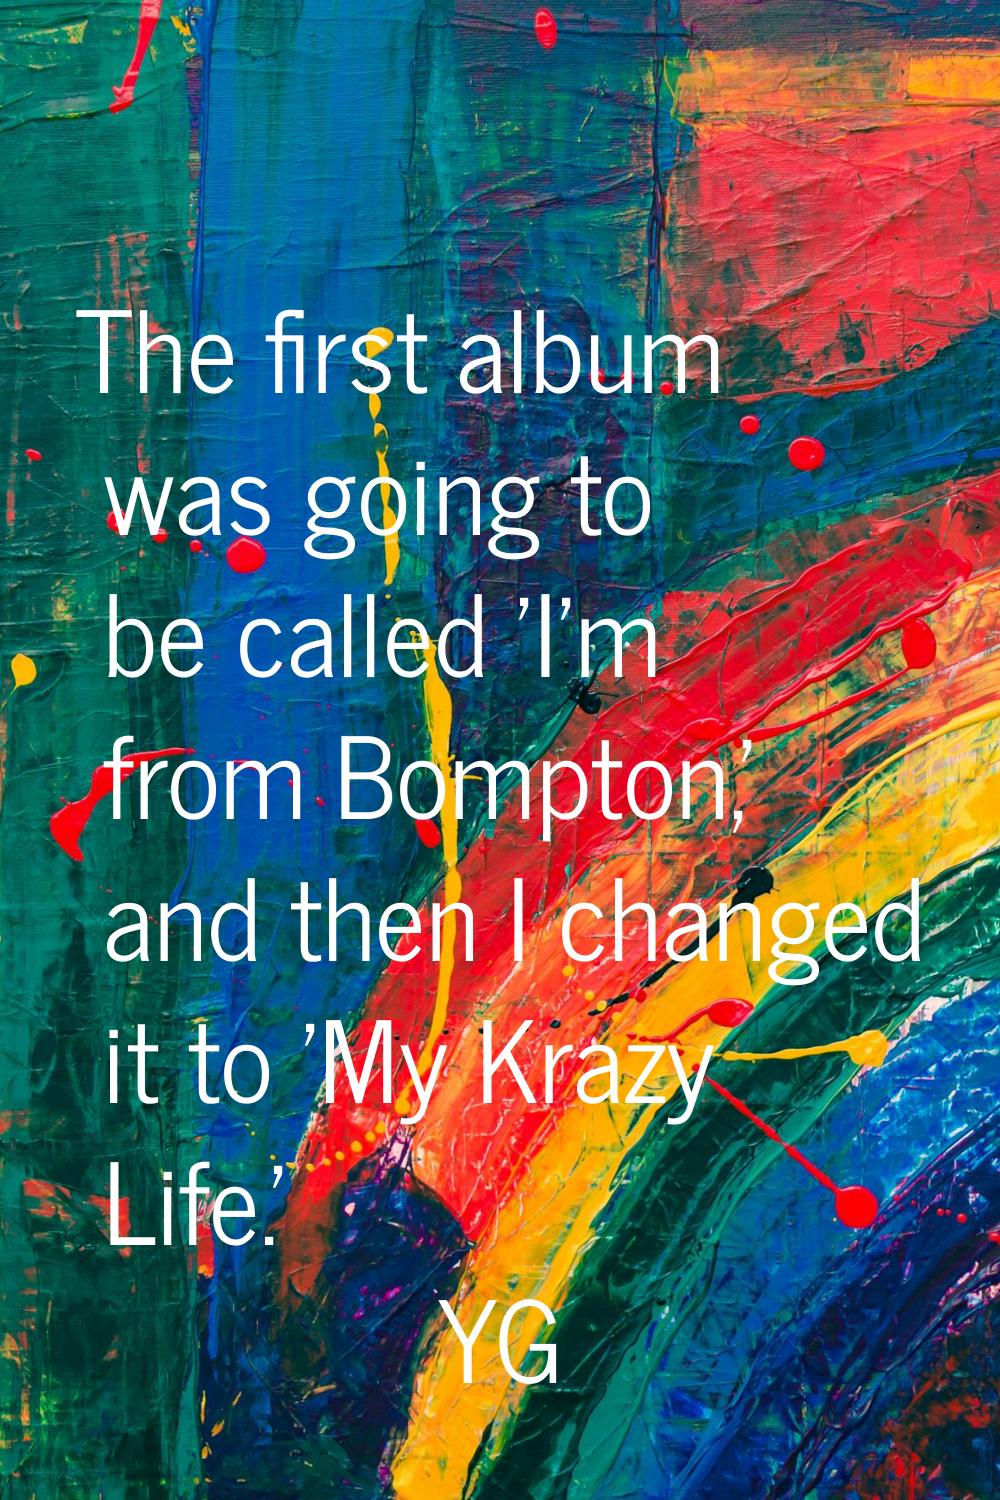 The first album was going to be called 'I'm from Bompton,' and then I changed it to 'My Krazy Life.